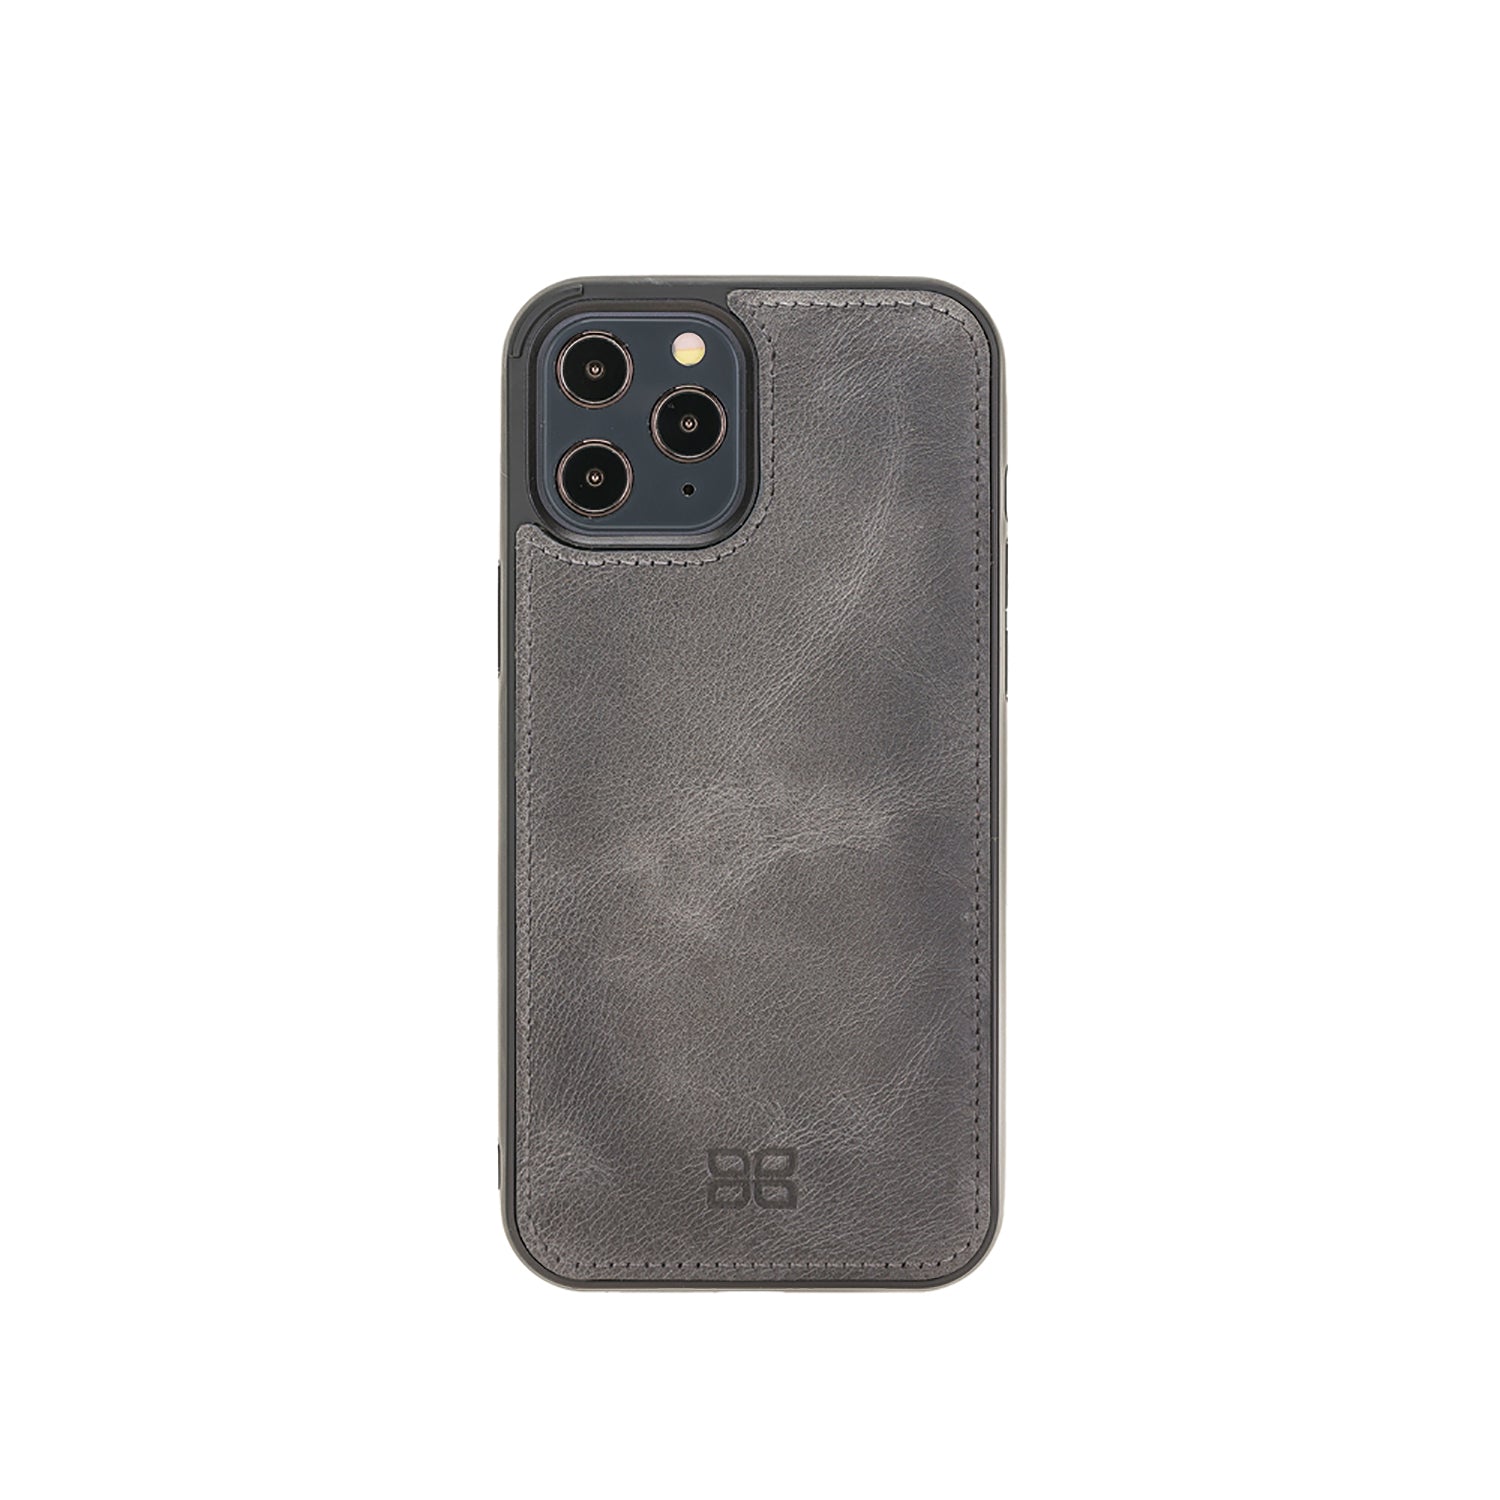 Flex Cover Leather Back Case for iPhone 12 Pro (6.1") - GRAY - saracleather